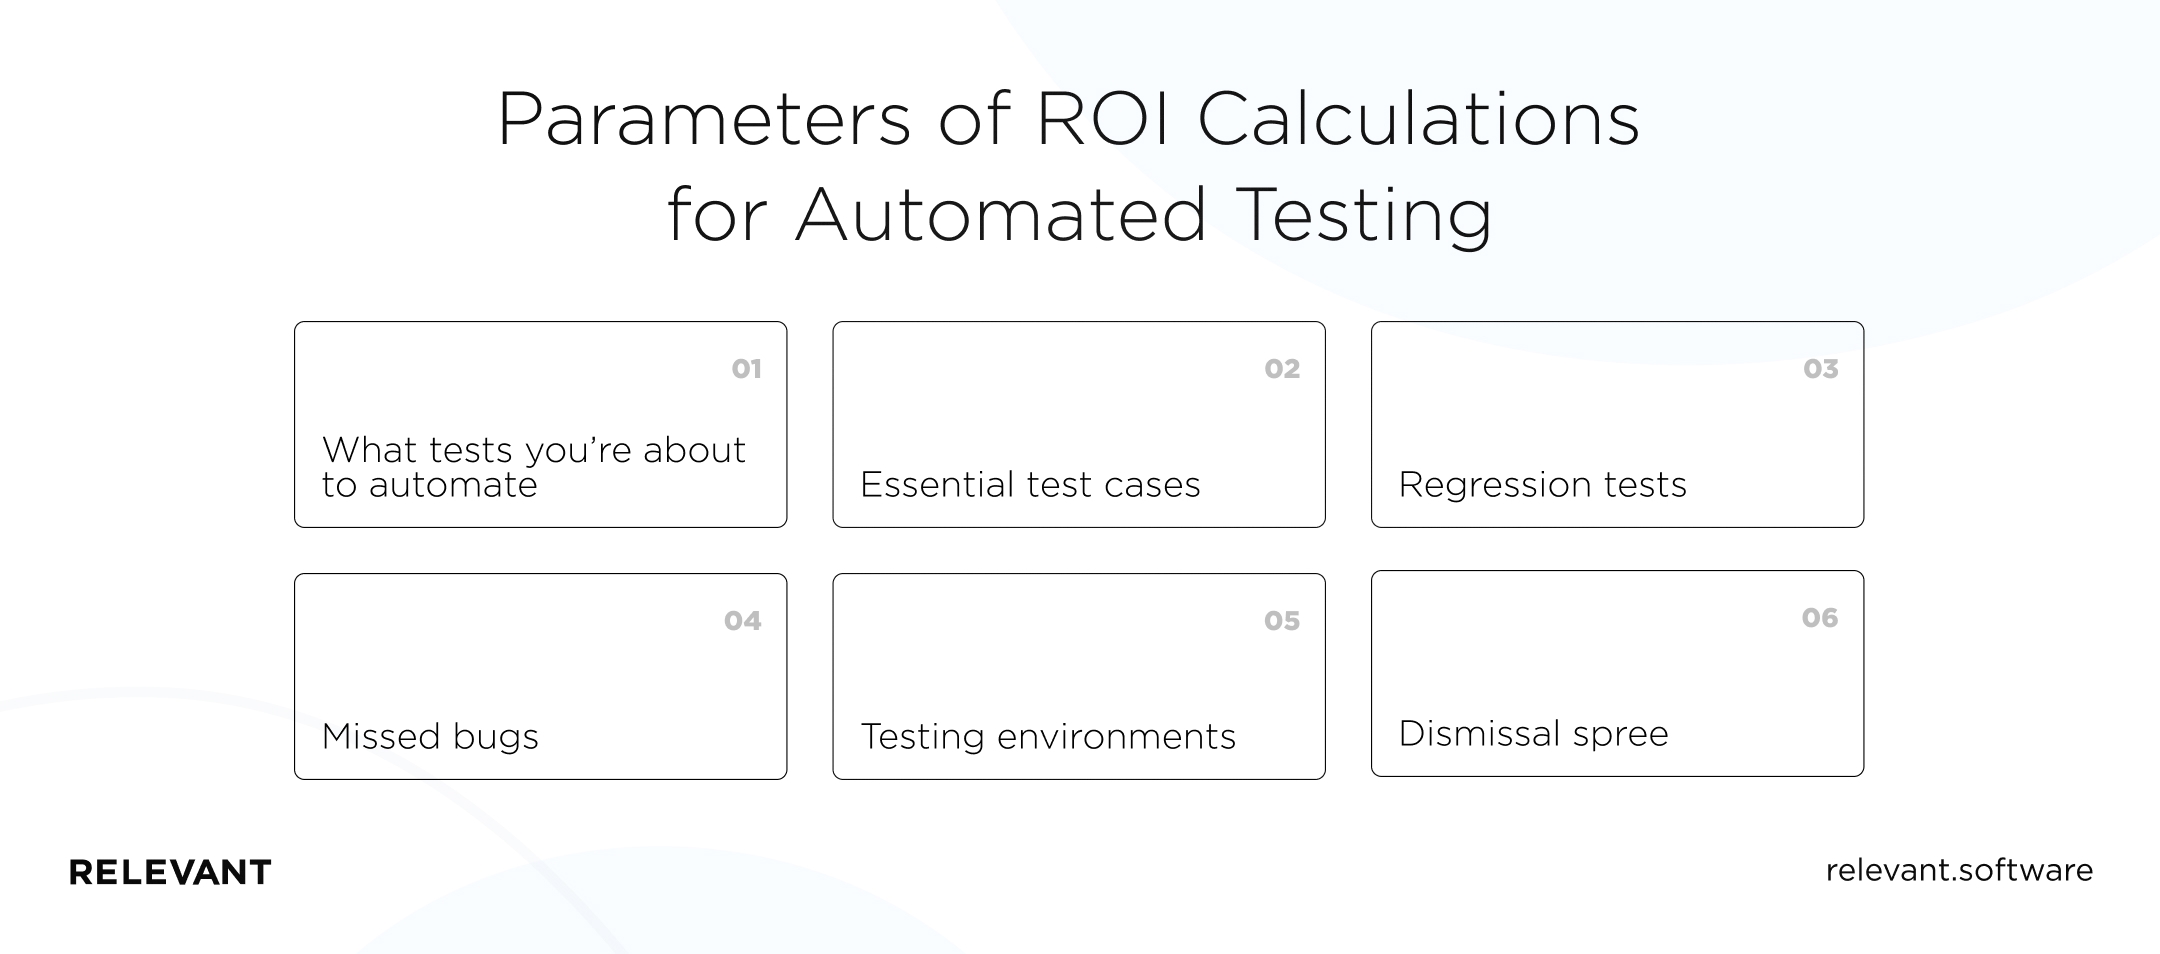 Parameters of ROI Calculations for Automated Testing